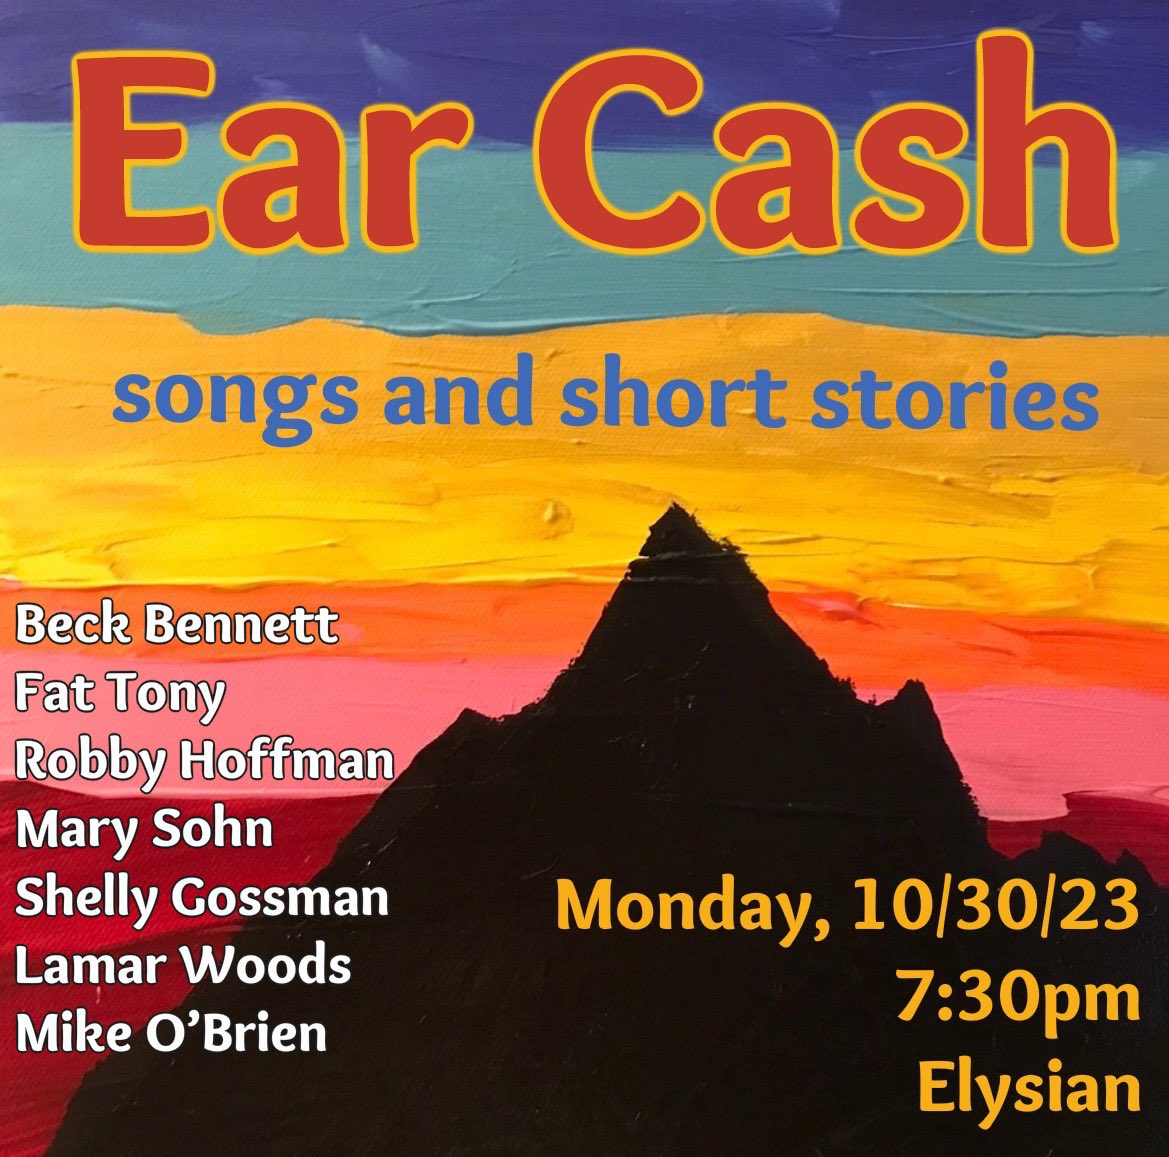 An amazing evening of songs and short stories is happening at @ElysianTheater on 10/30. Look at this lineup. Get your tix before they sell out. Tix- elysiantheater.com/shows/earcash. @becbenit @fattonyrap